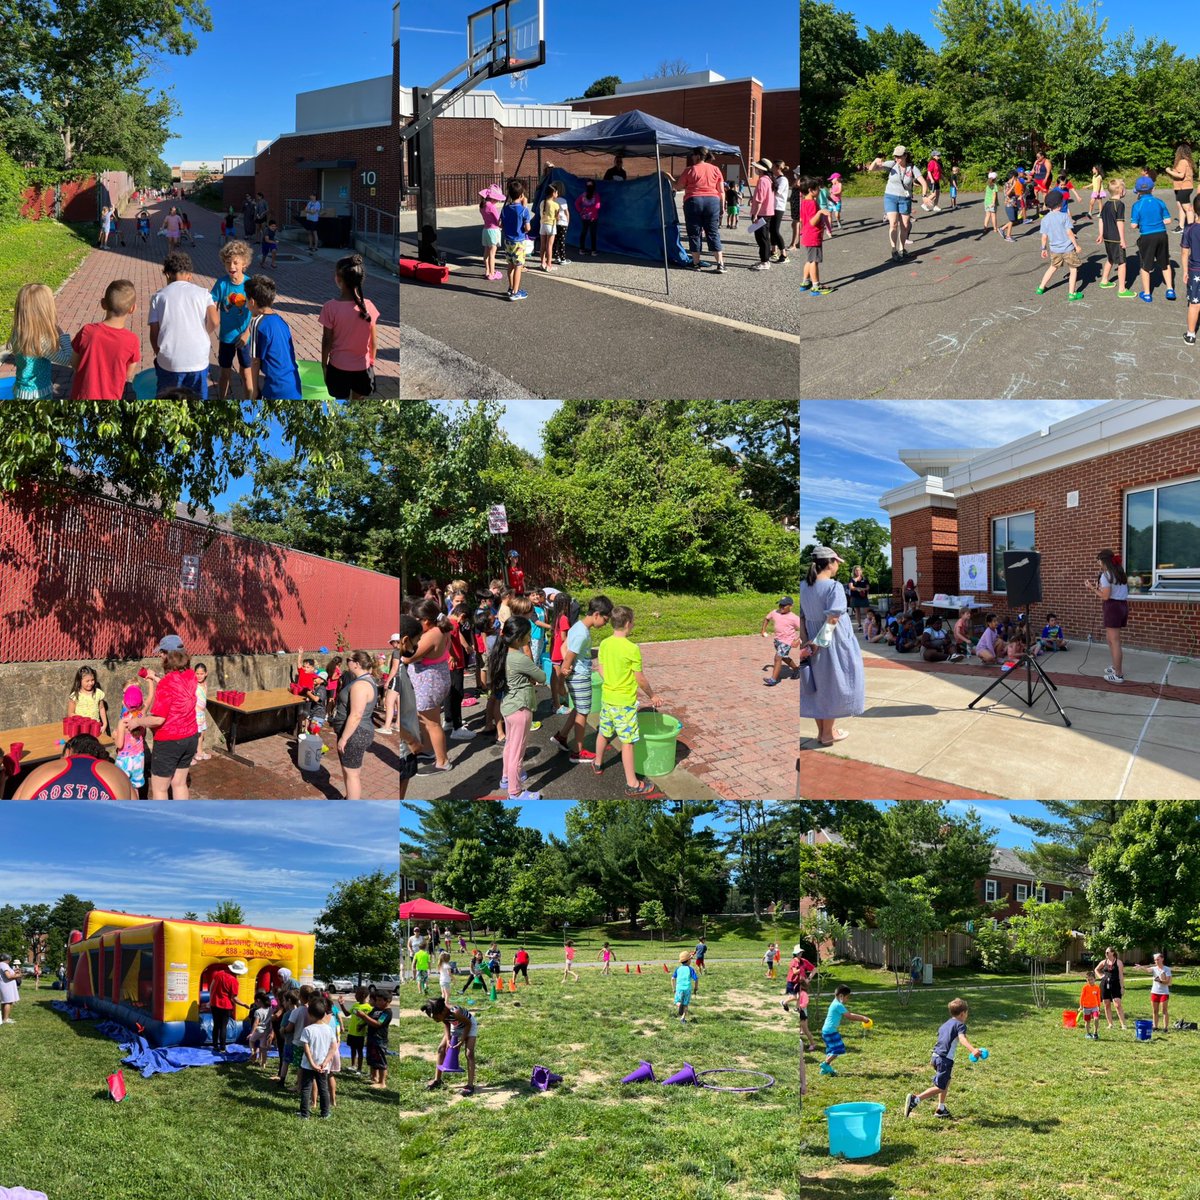 Successful Field Day…Thank you <a target='_blank' href='http://twitter.com/AbingdonPTA'>@AbingdonPTA</a> <a target='_blank' href='http://twitter.com/AbingdonGIFT'>@AbingdonGIFT</a> <a target='_blank' href='http://twitter.com/AbingdonElem'>@AbingdonElem</a> & Abingdon Staff in  making this a memorable day for all of our kiddos!!! <a target='_blank' href='http://search.twitter.com/search?q=abdrocks'><a target='_blank' href='https://twitter.com/hashtag/abdrocks?src=hash'>#abdrocks</a></a> <a target='_blank' href='http://twitter.com/JrV4Victory'>@JrV4Victory</a> <a target='_blank' href='http://twitter.com/CoachReed_VA'>@CoachReed_VA</a> <a target='_blank' href='https://t.co/rYIO61huol'>https://t.co/rYIO61huol</a>